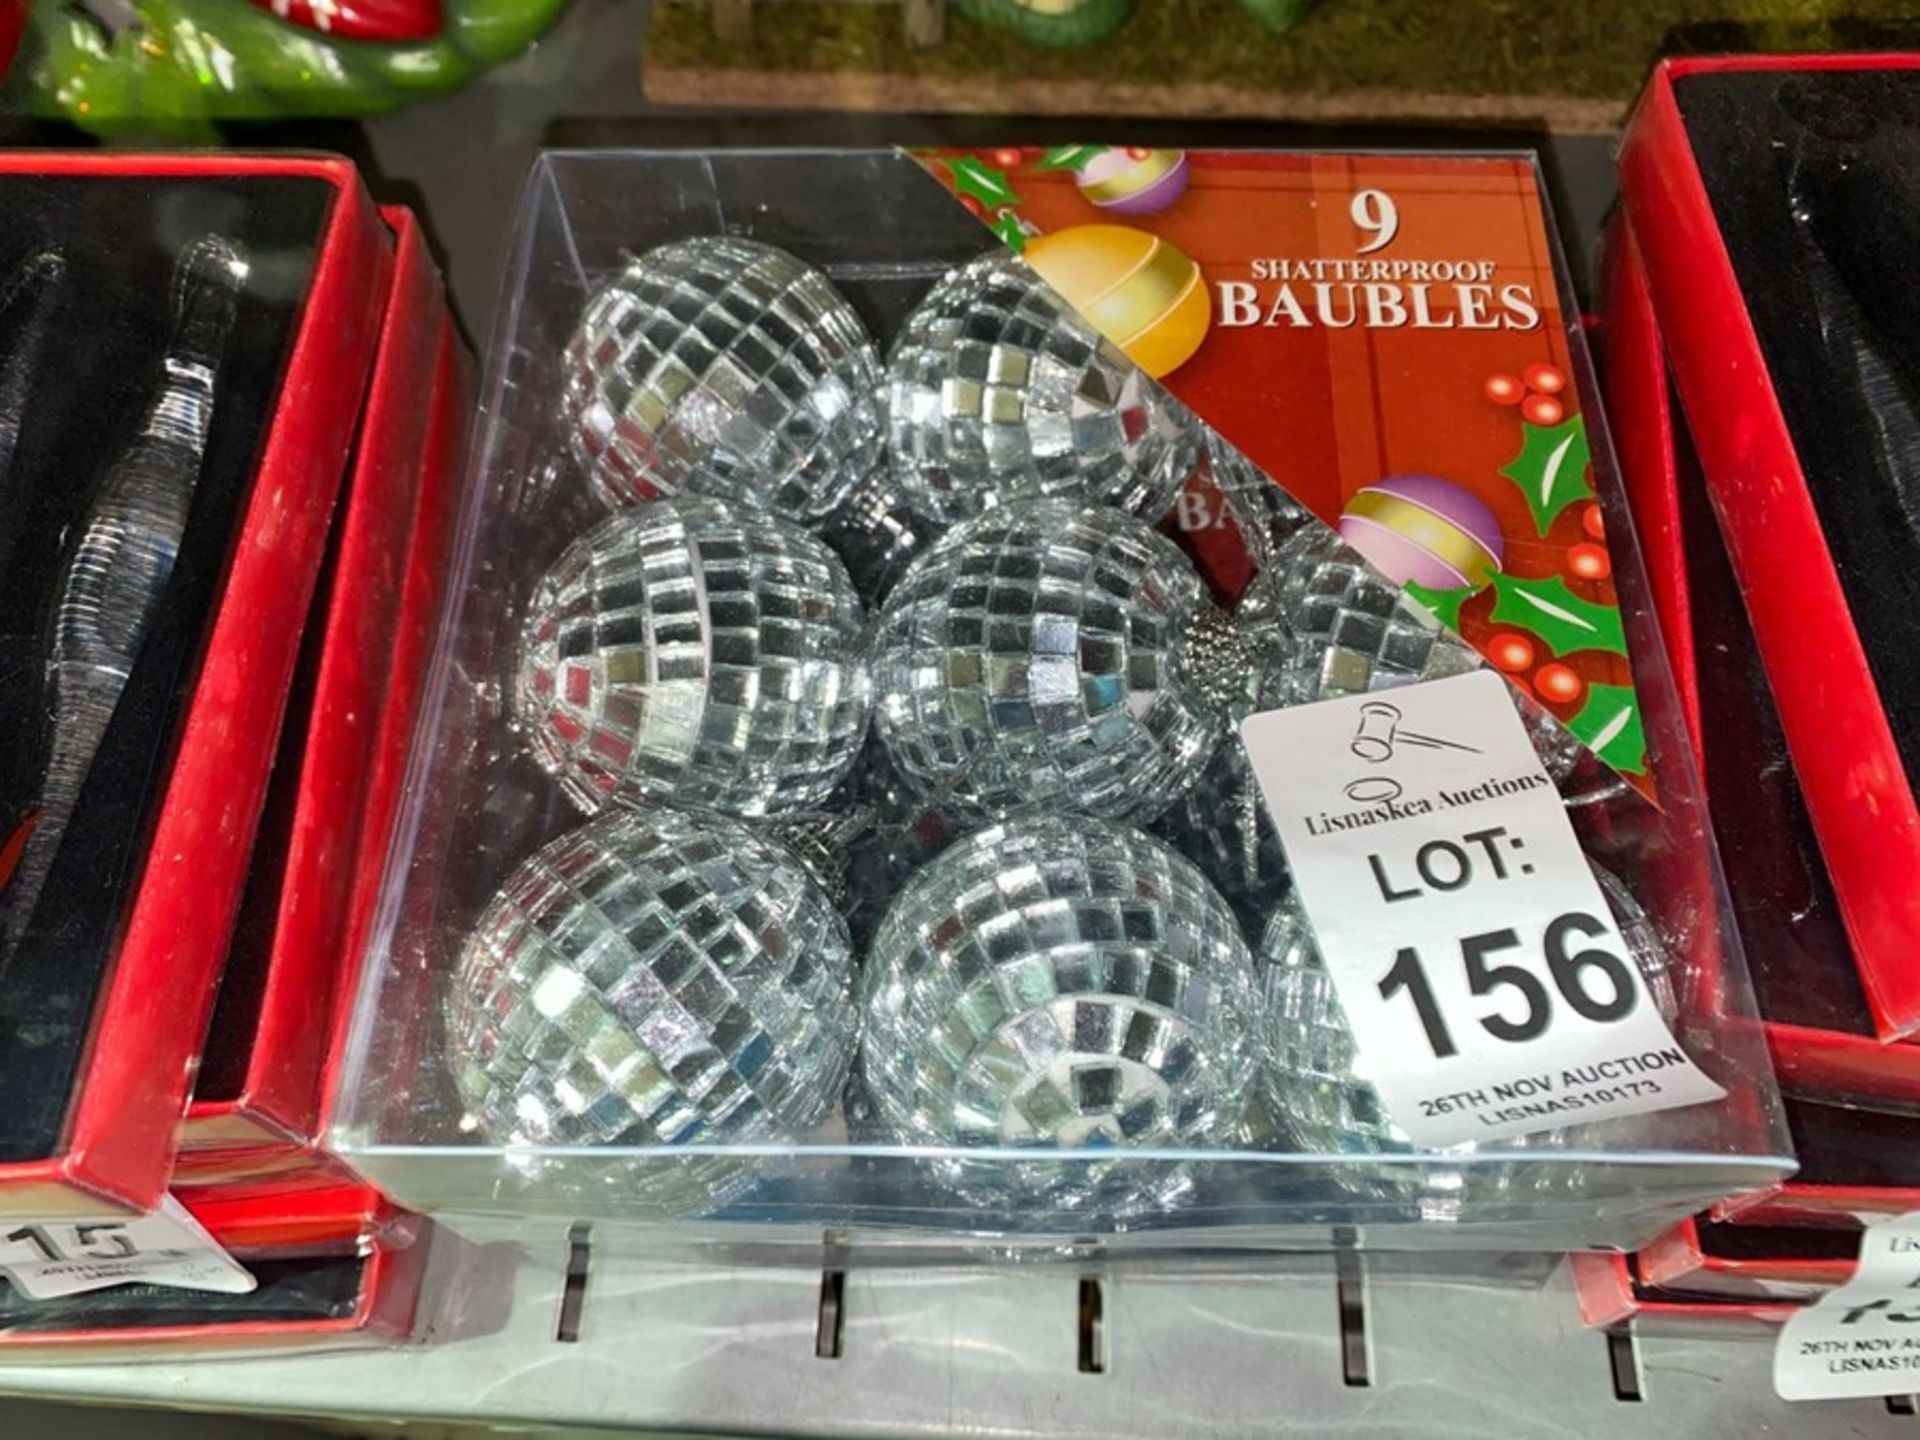 2 BOXES OF NEW MIRRORED BAUBLES